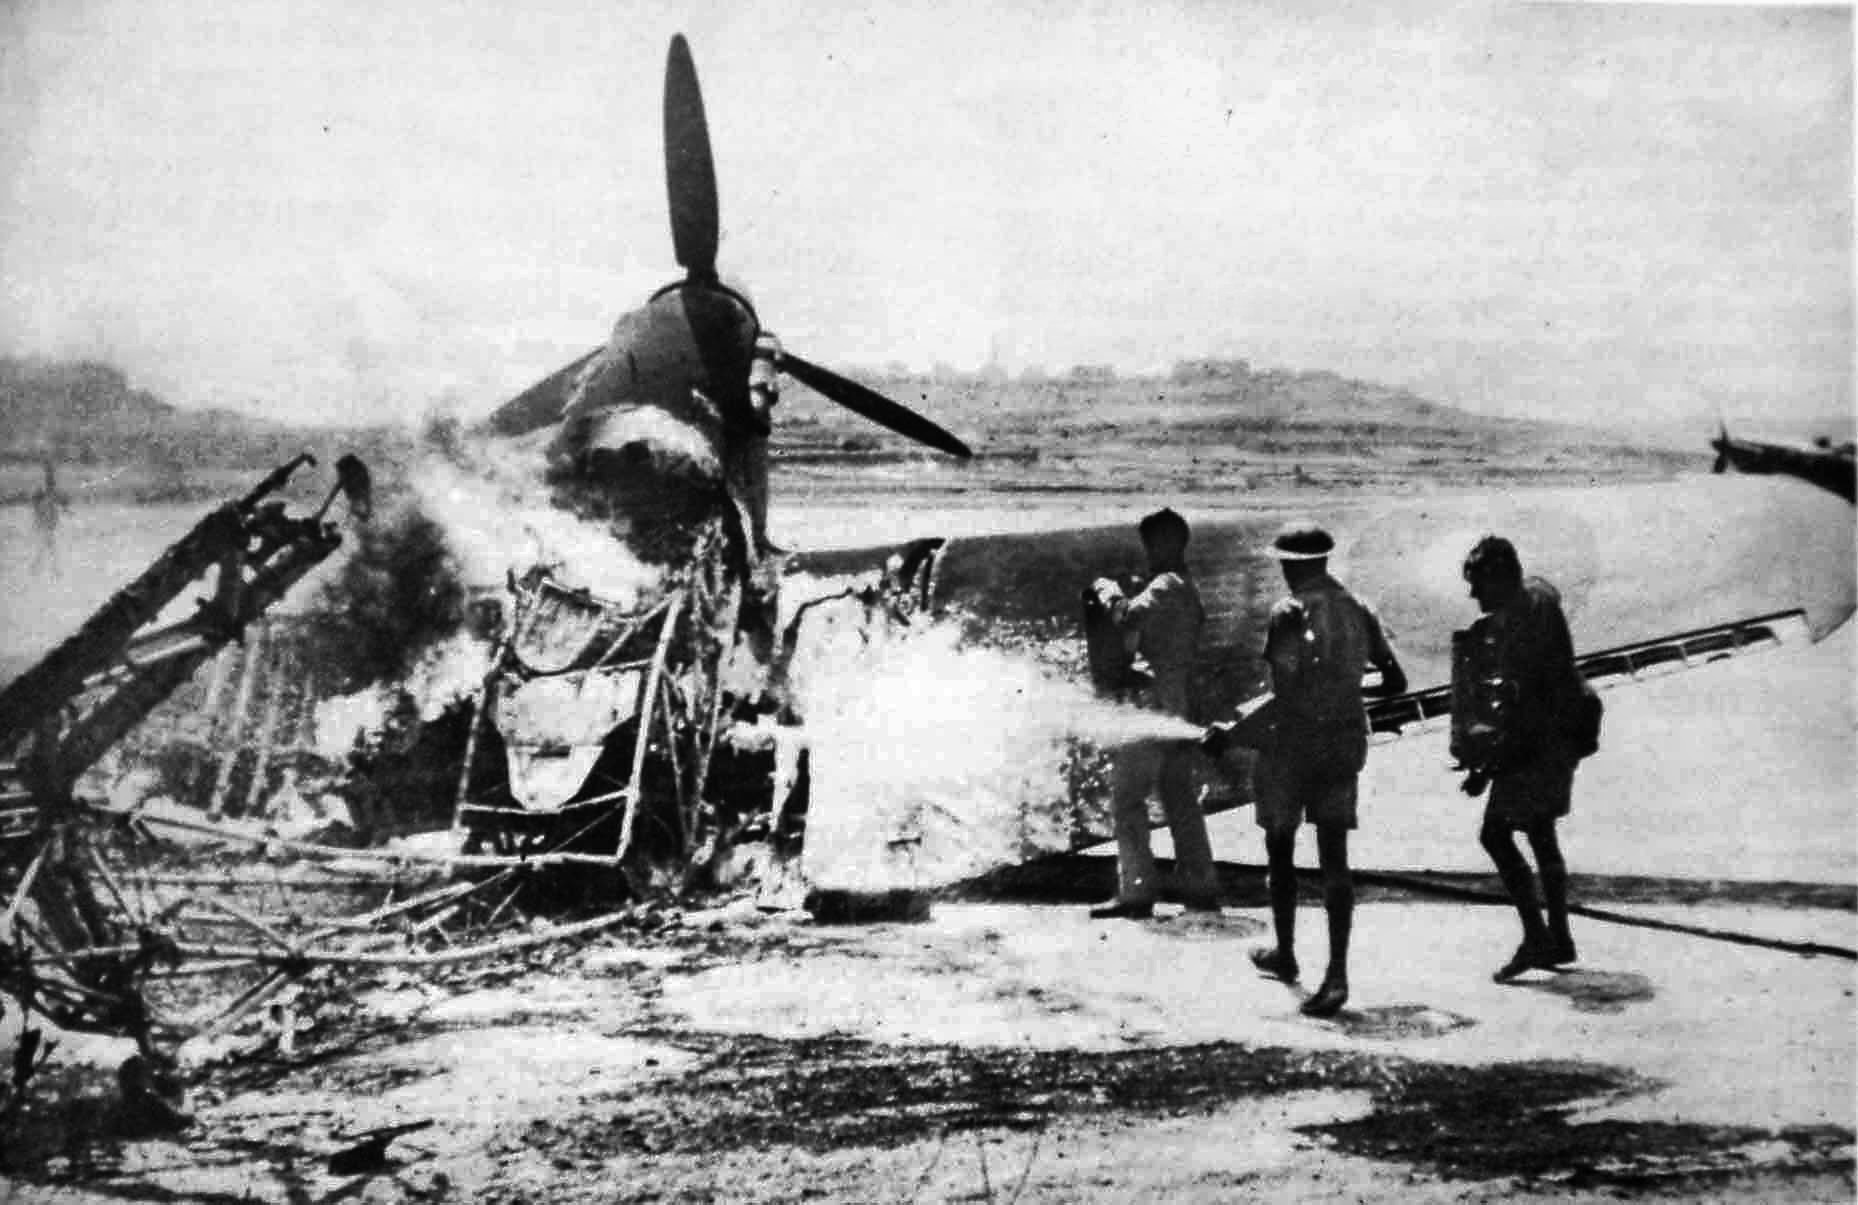 Firemen douse a burning Hurricane, destroyed in a raid on a Malta airfield. The British lost many planes but kept on fighting. 